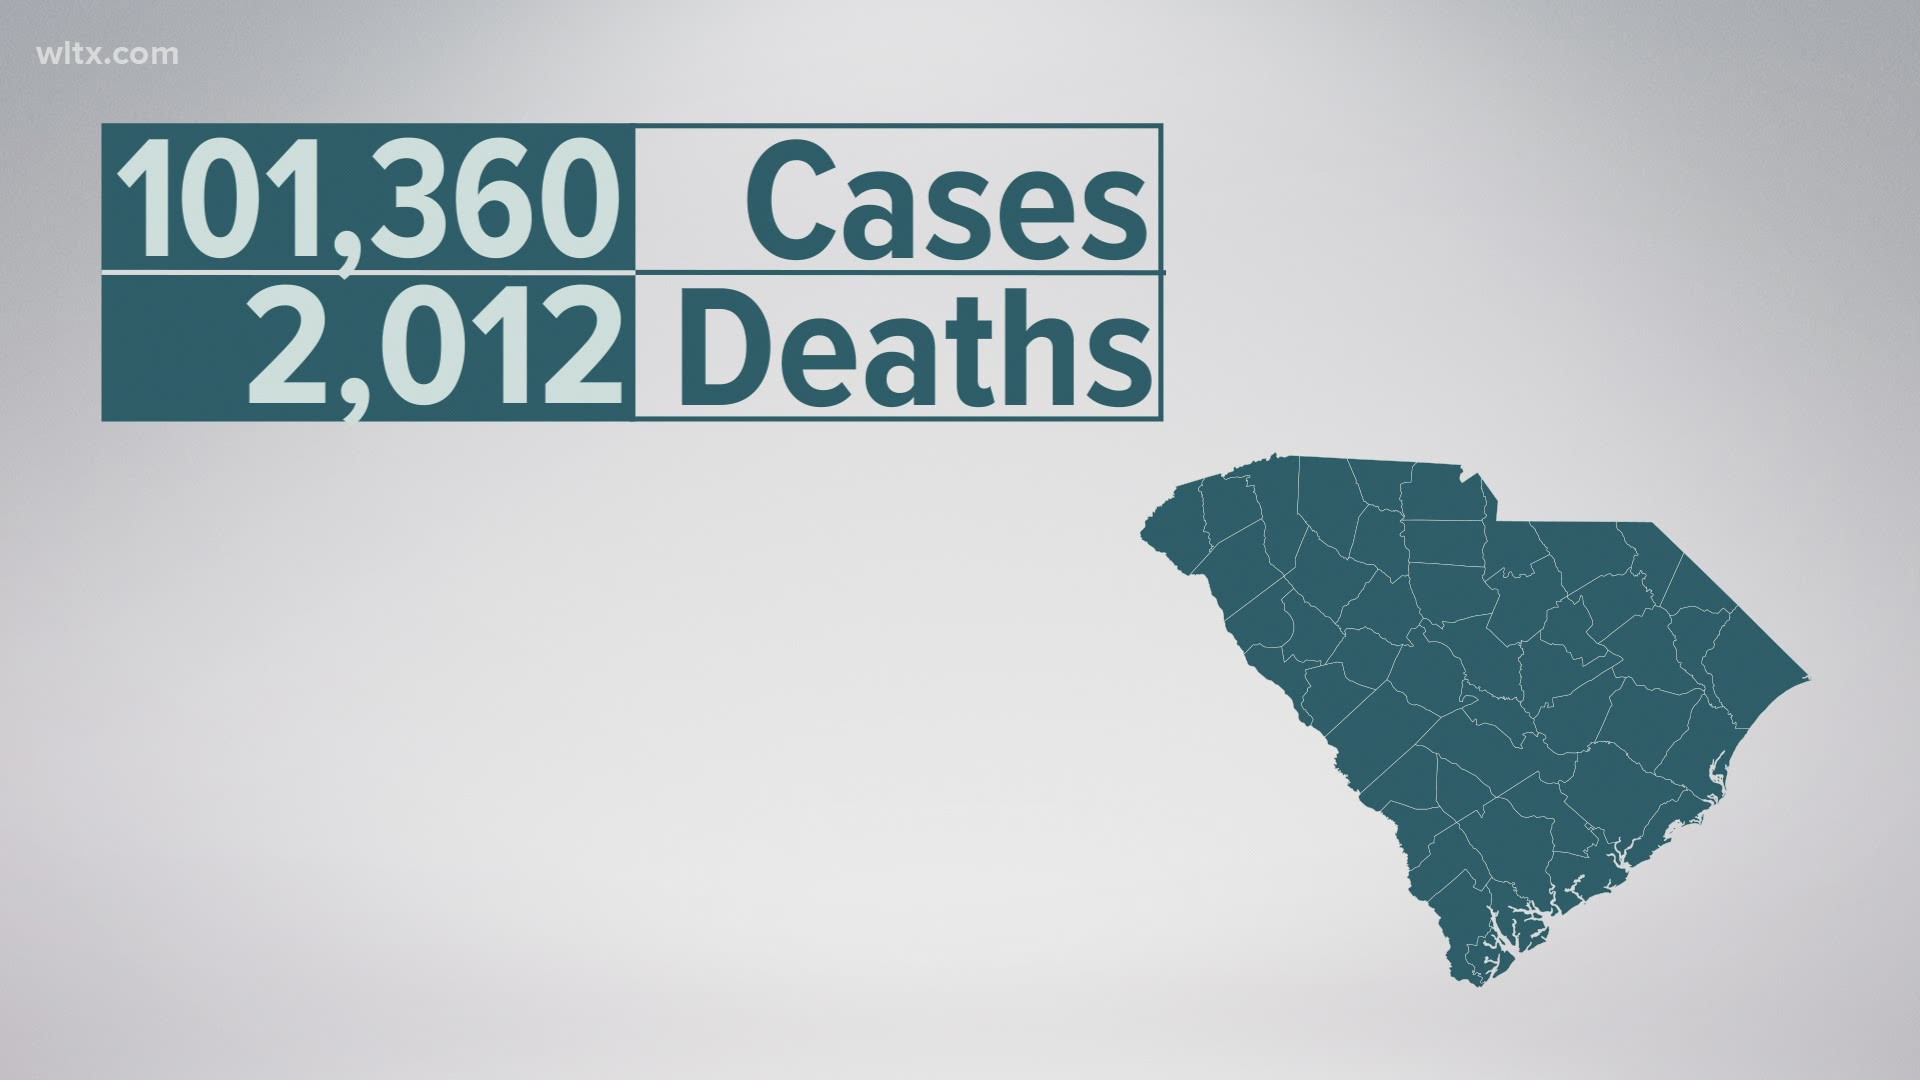 The milestone comes just 26 days after the state crossed 1,000 coronavirus deaths.